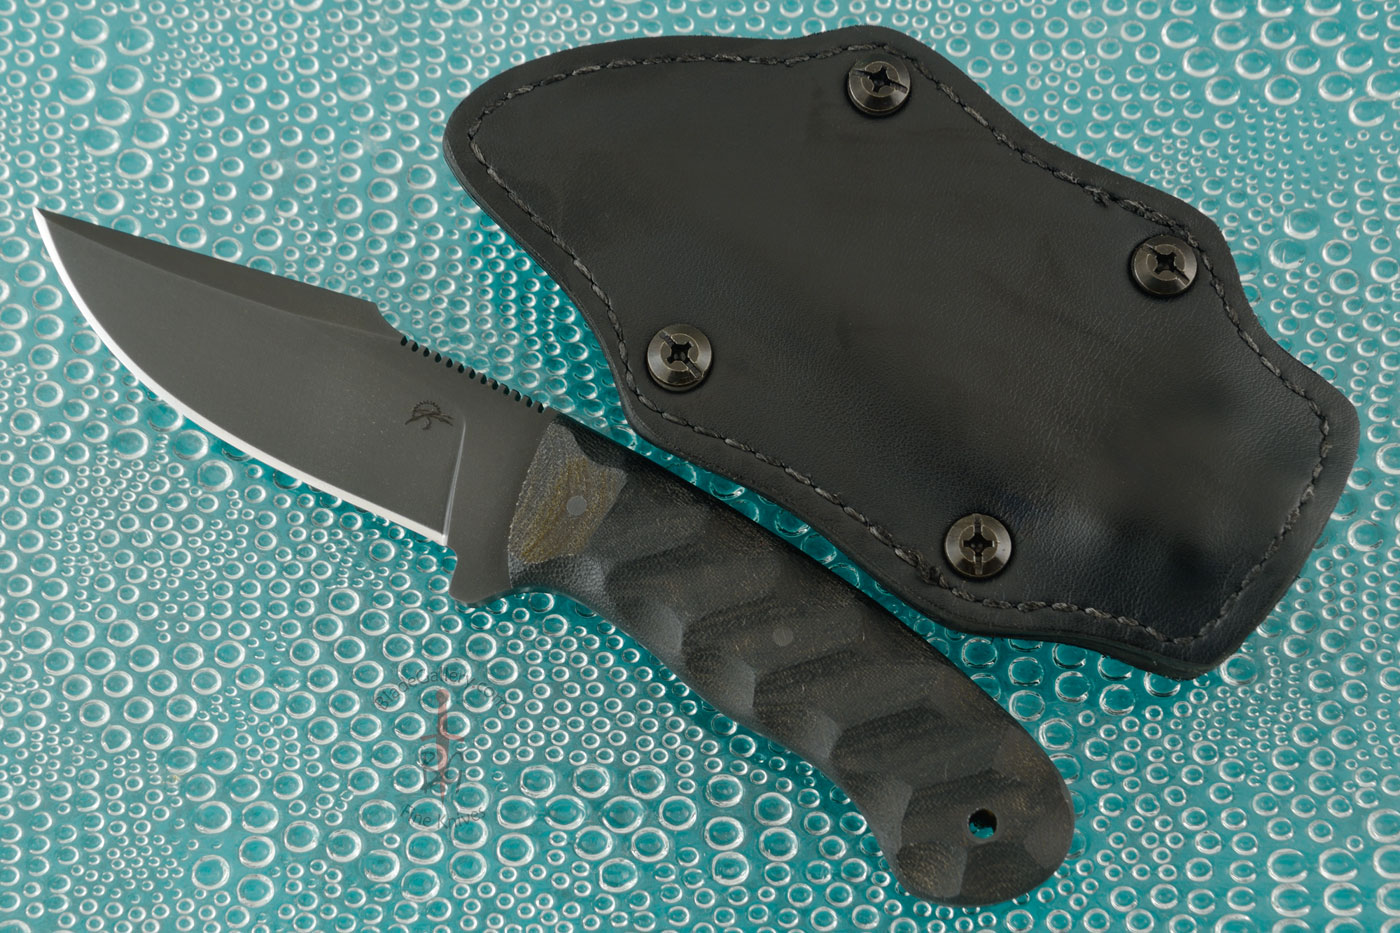 Jaeger with Sculpted Black Micarta (Jason Knight Collaboration)